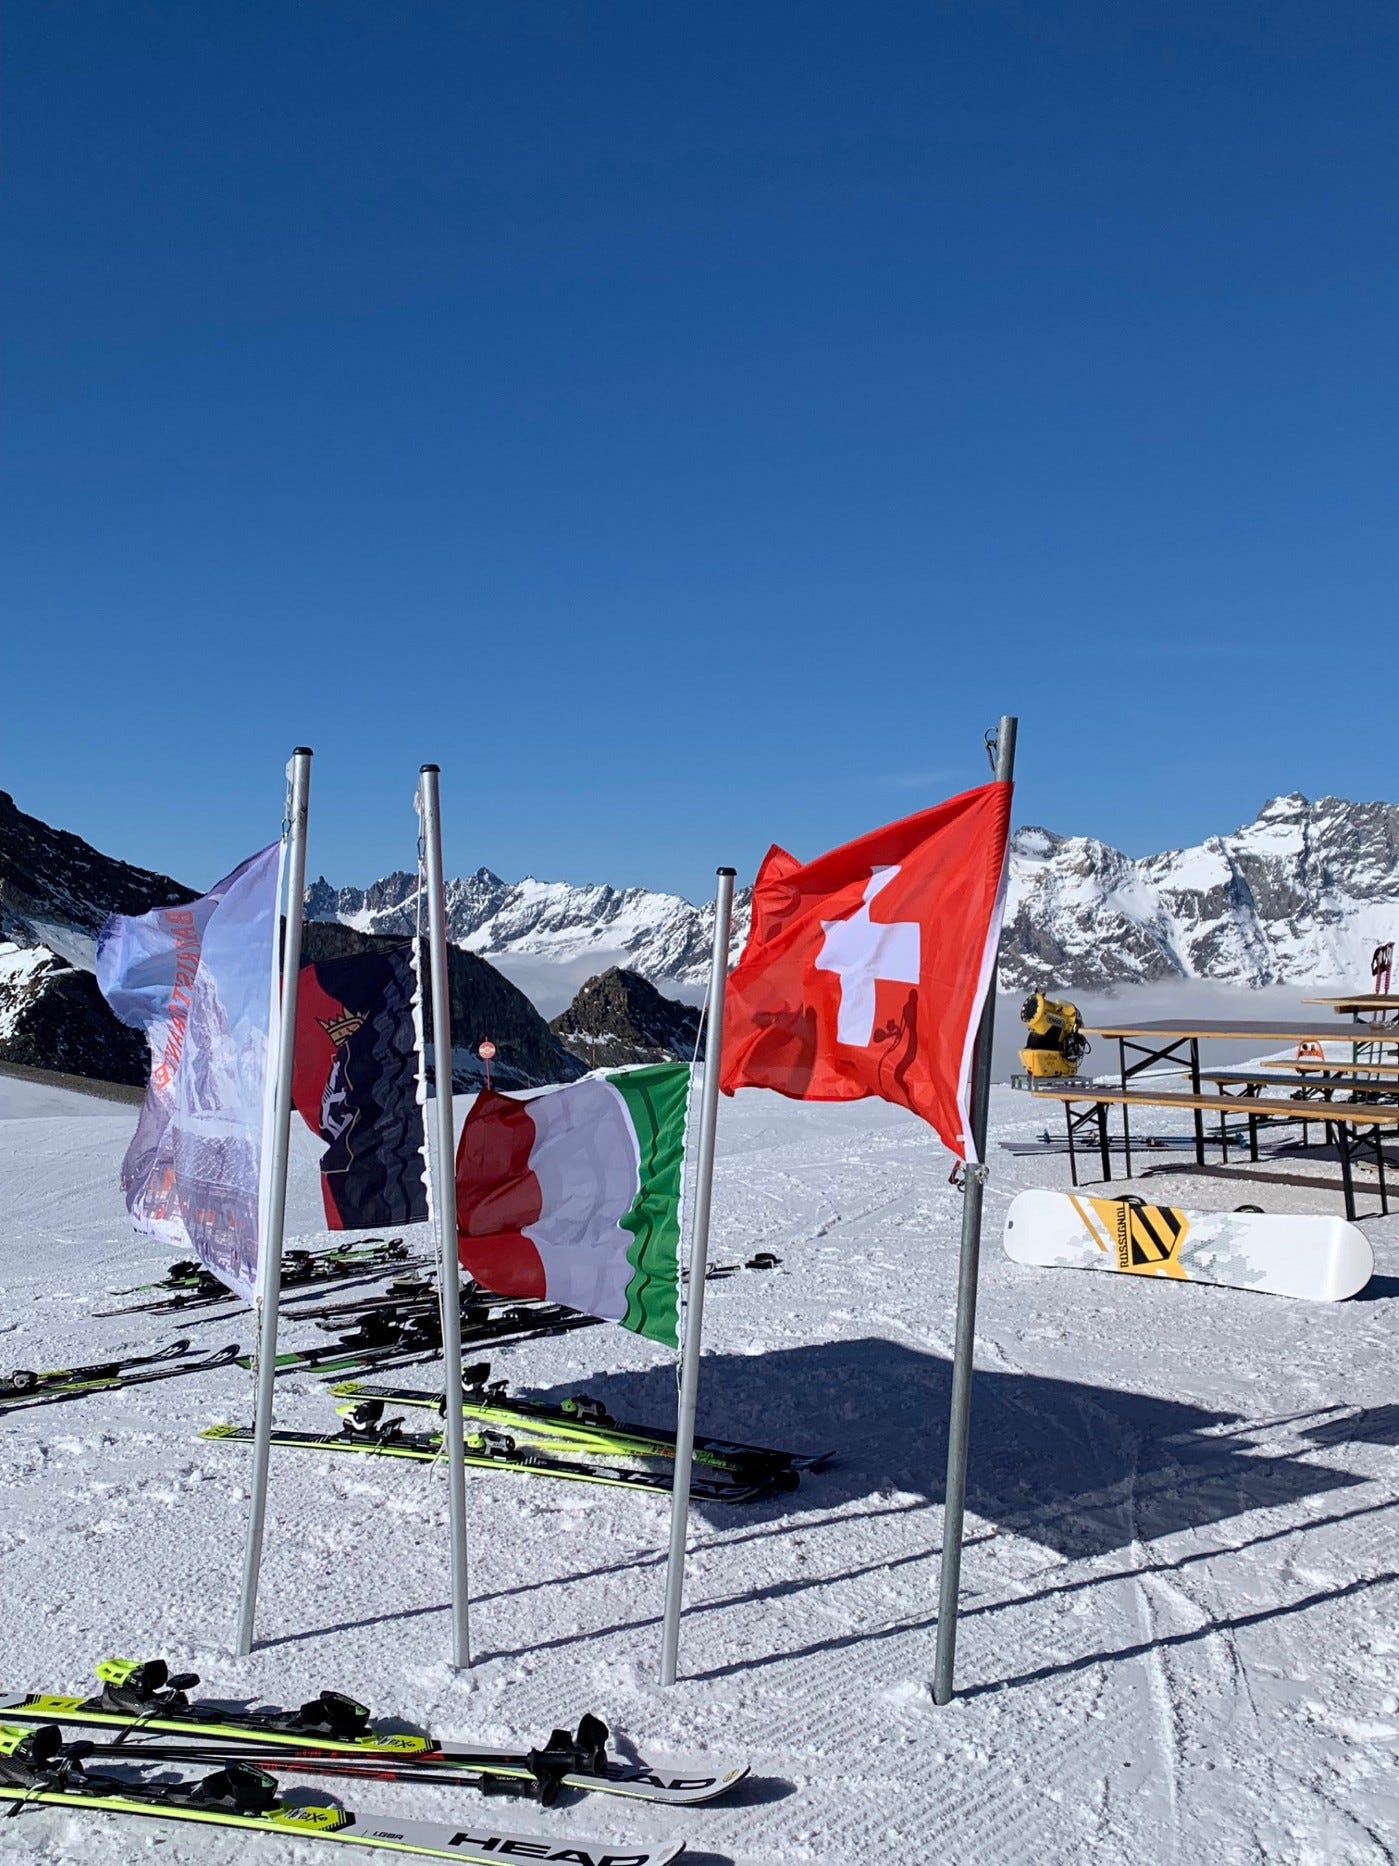 A photograph on a mountain peak with flags of Italian and Swiss provinces as well as the national flags of Italy and Switzerland. They are blowing in the wind with a mountain range behind them. Several pairs of skis and a snowboard lie on the snow and picnic benches from a restaurant refuge are visible on the right.